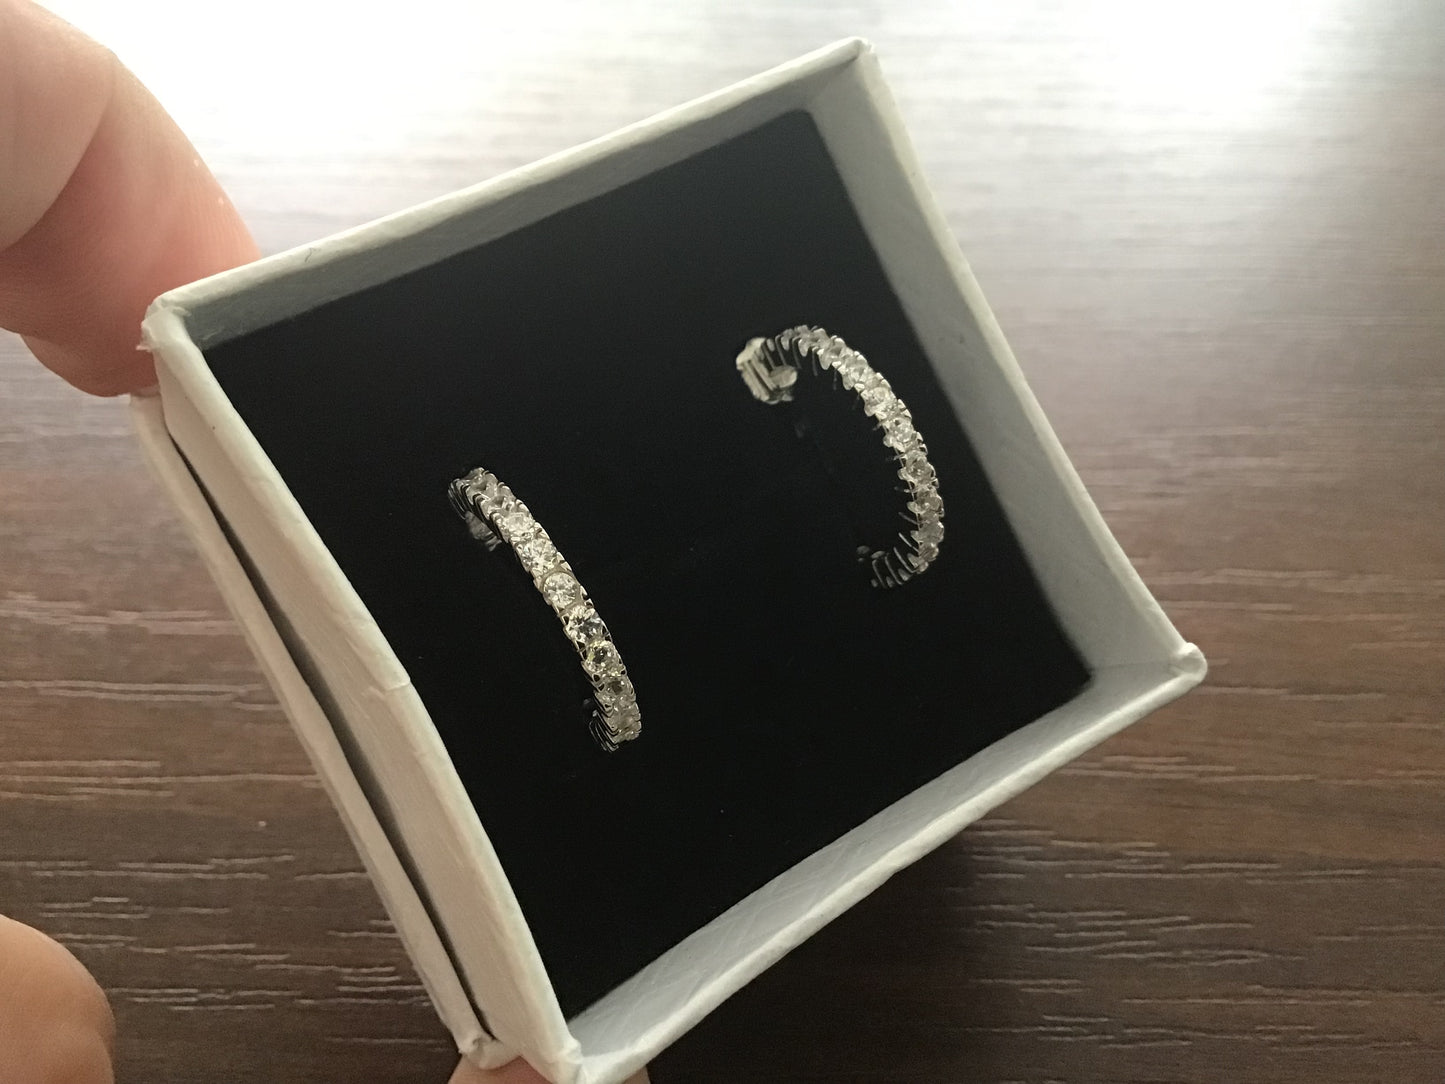 Genuine 925 Sparkly CZ Hoop Earrings, Great Sparkle, Gorgeous Design, 14mm